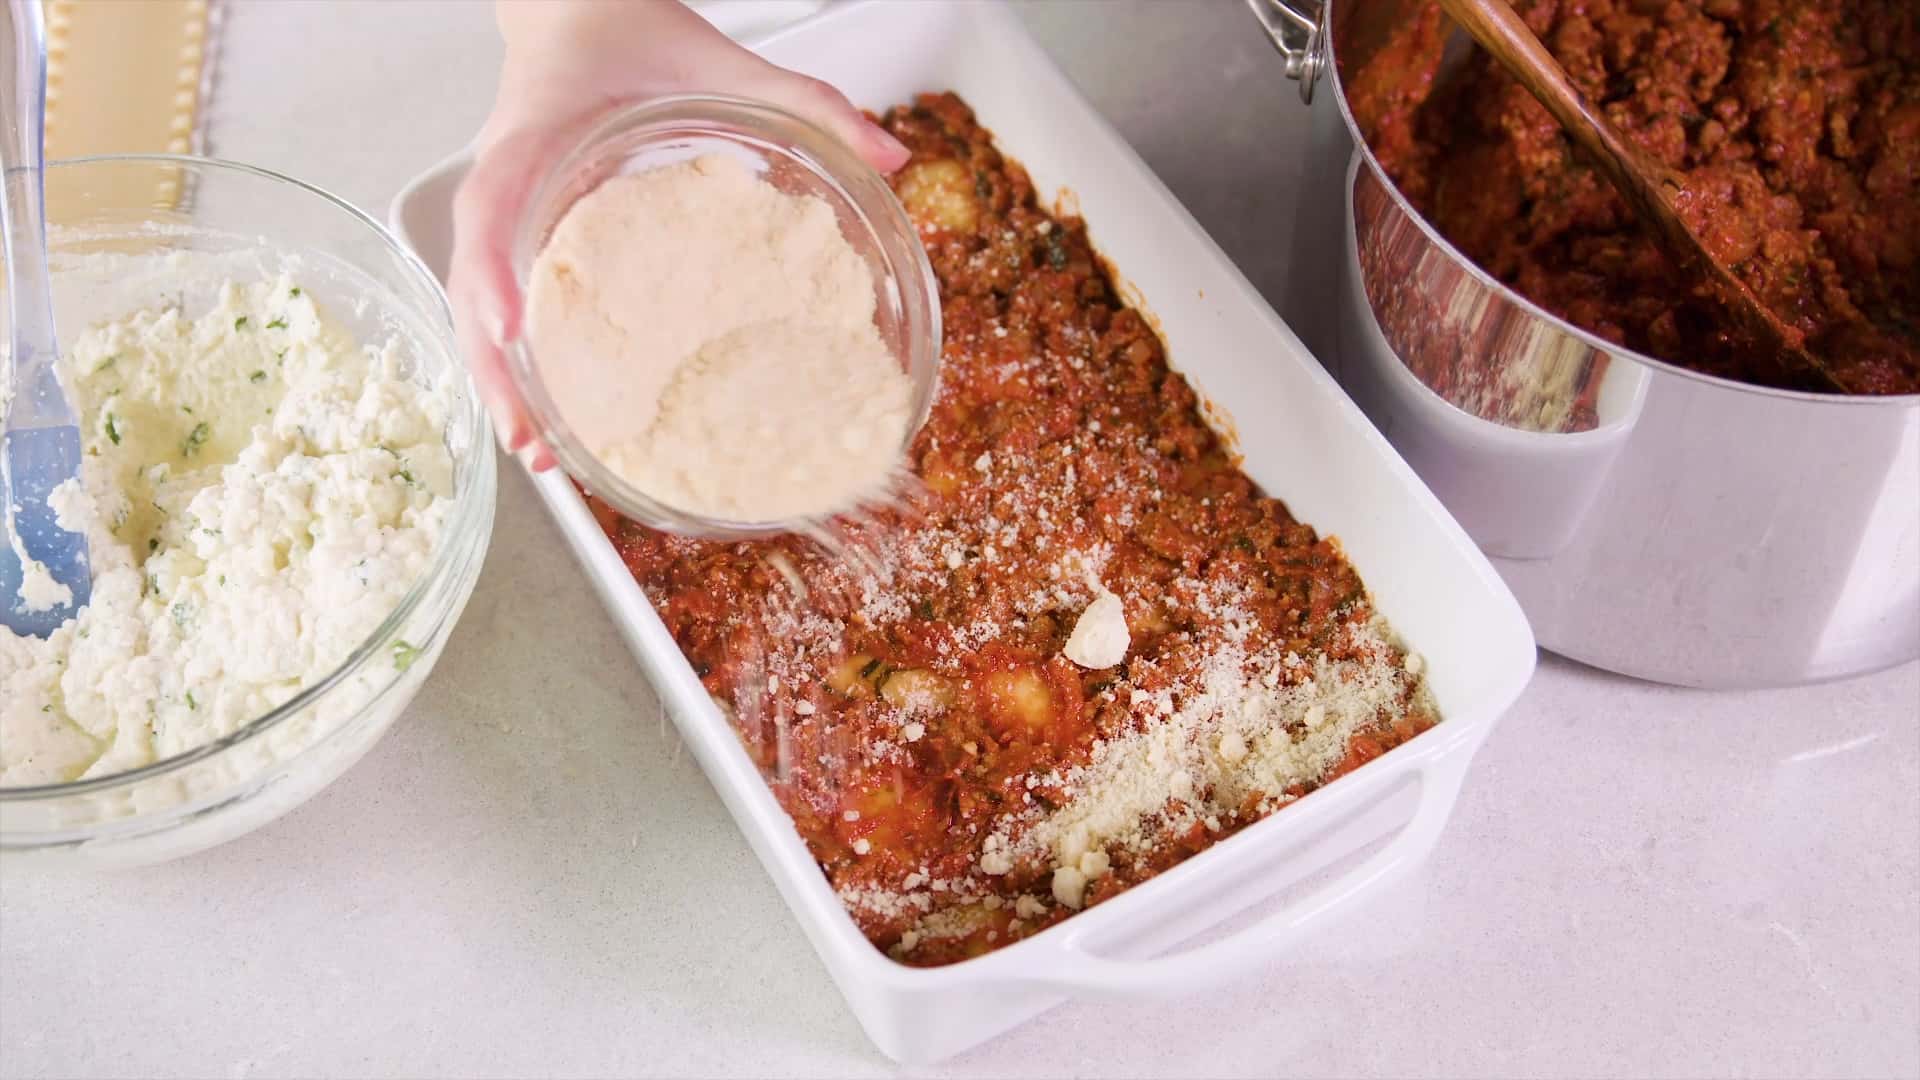 Overhead view of a high sided white glass casserole dish filled with multiple layers of lasagna and the newest layer being added to the meat sauce layer with grated parmesan cheese sprinkled from a medium sized clear glass mixing bowl.